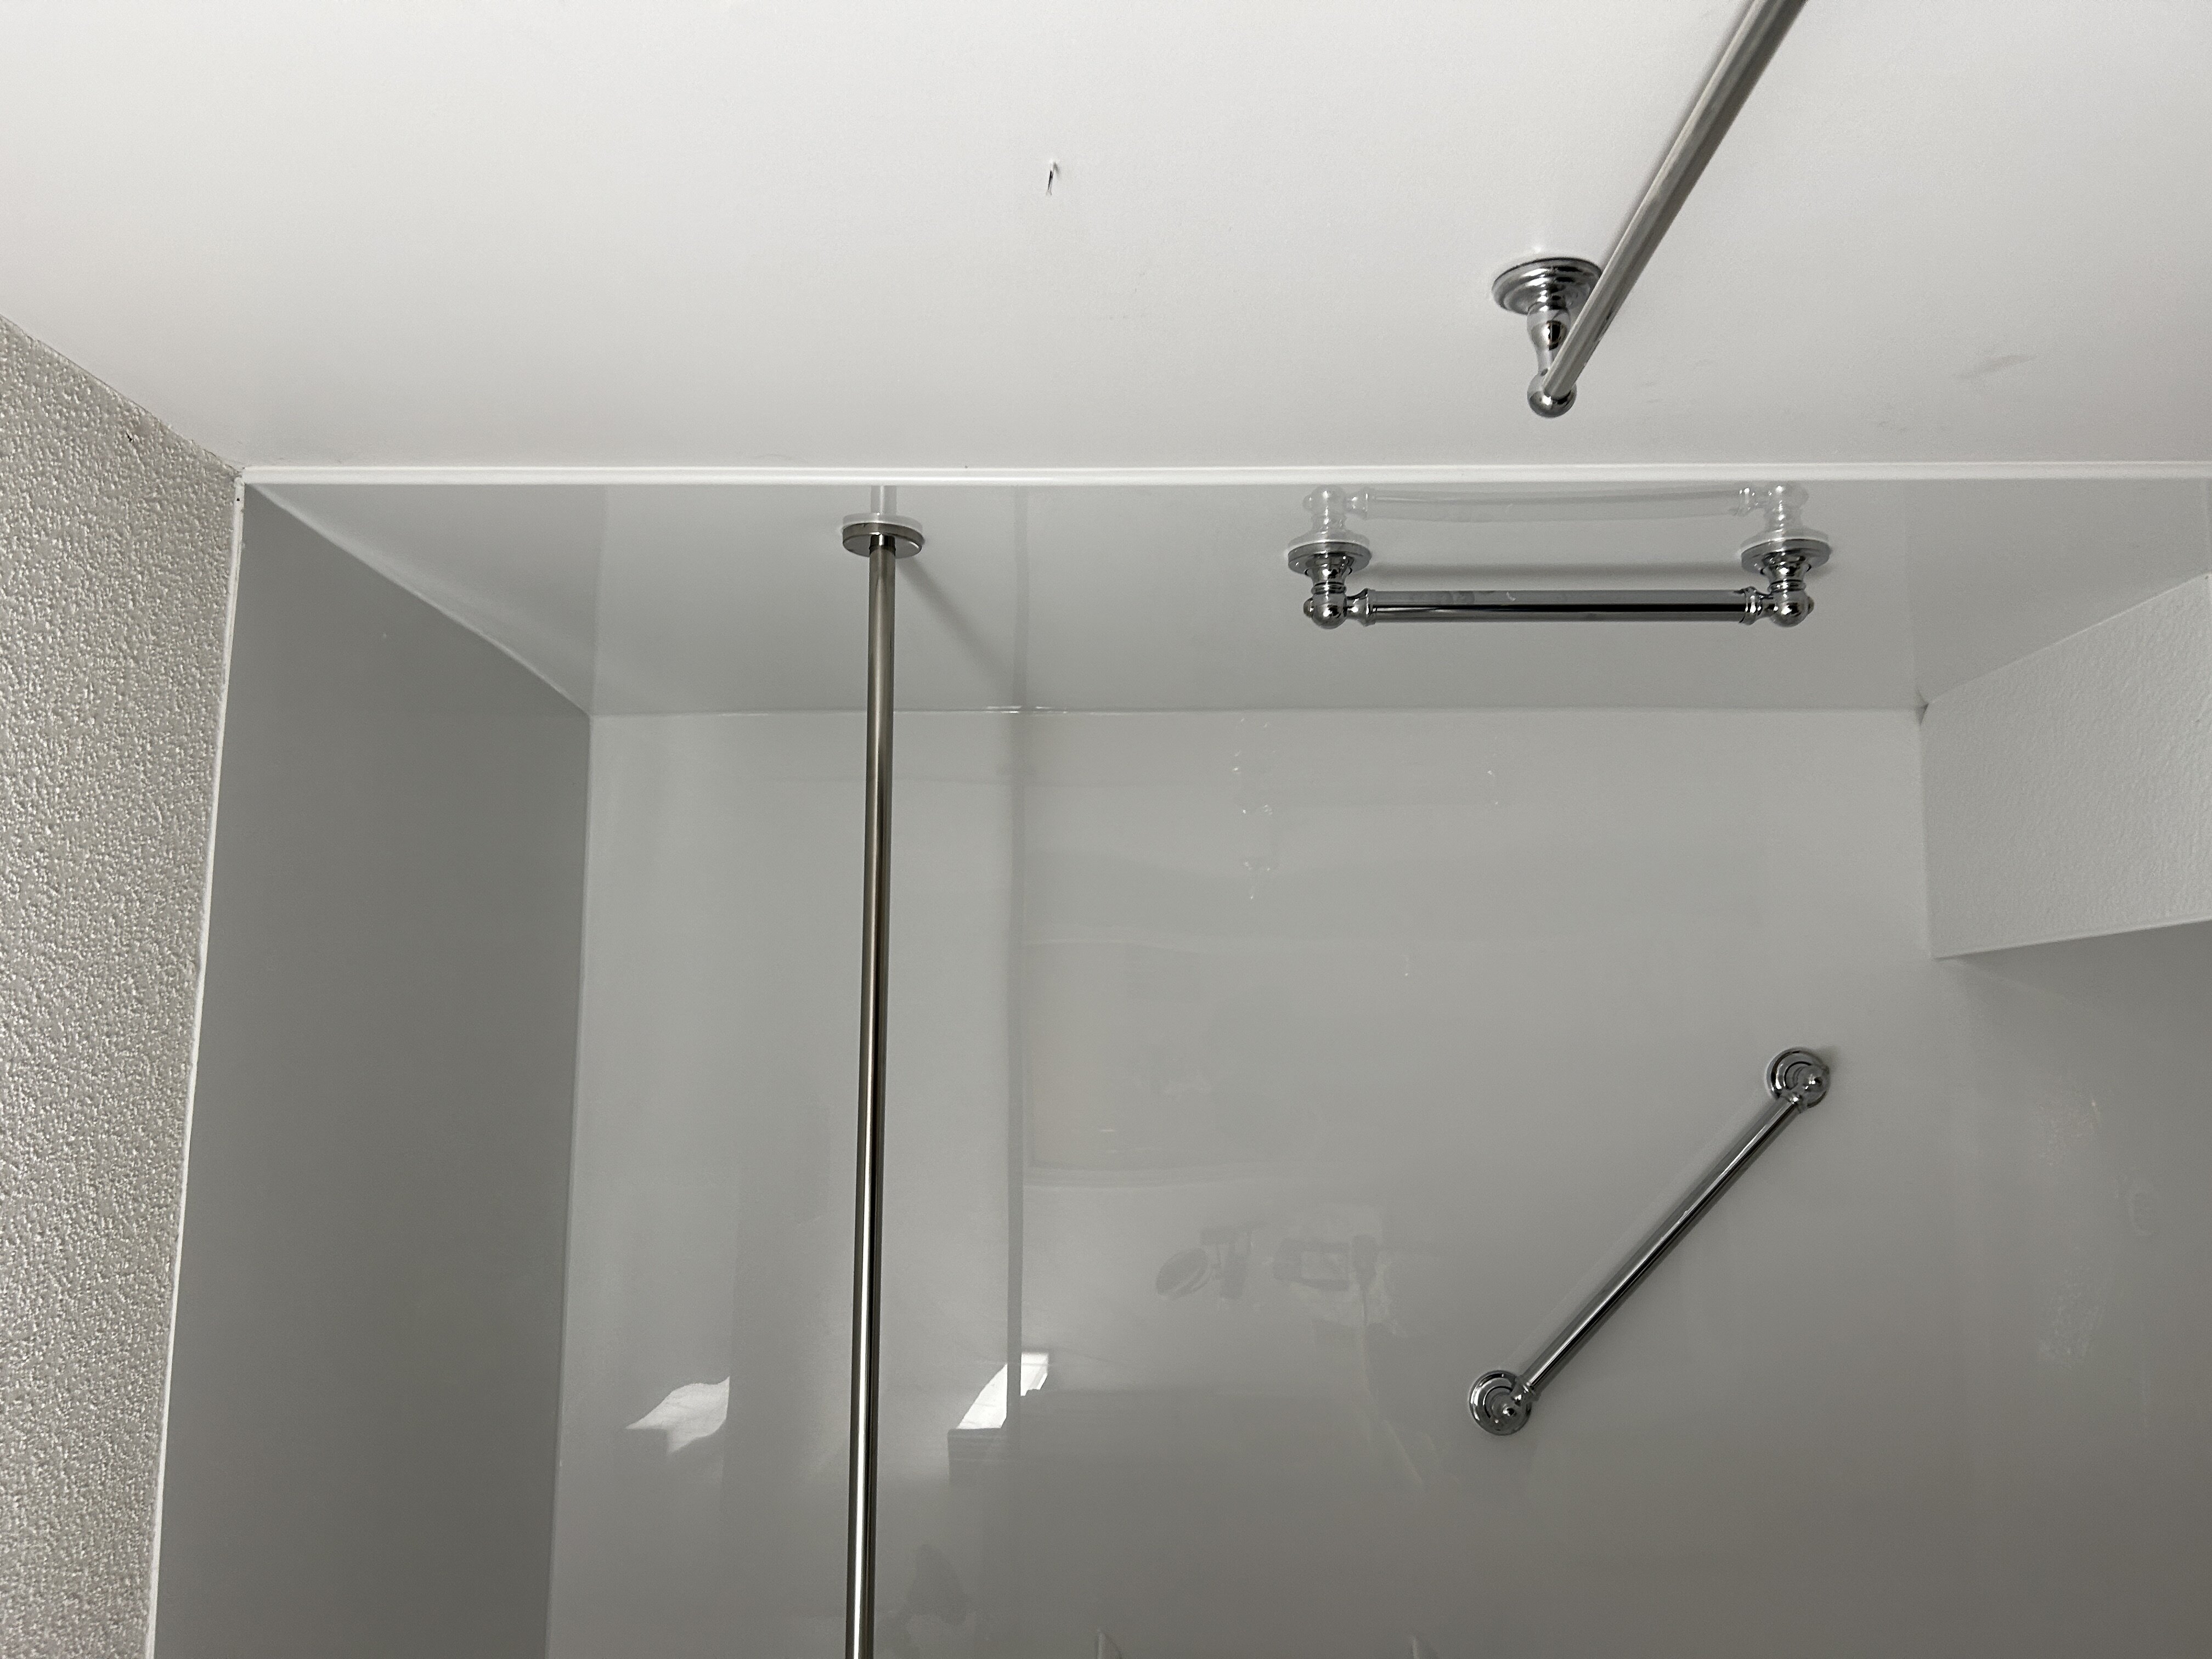 New shower complete with grab bars